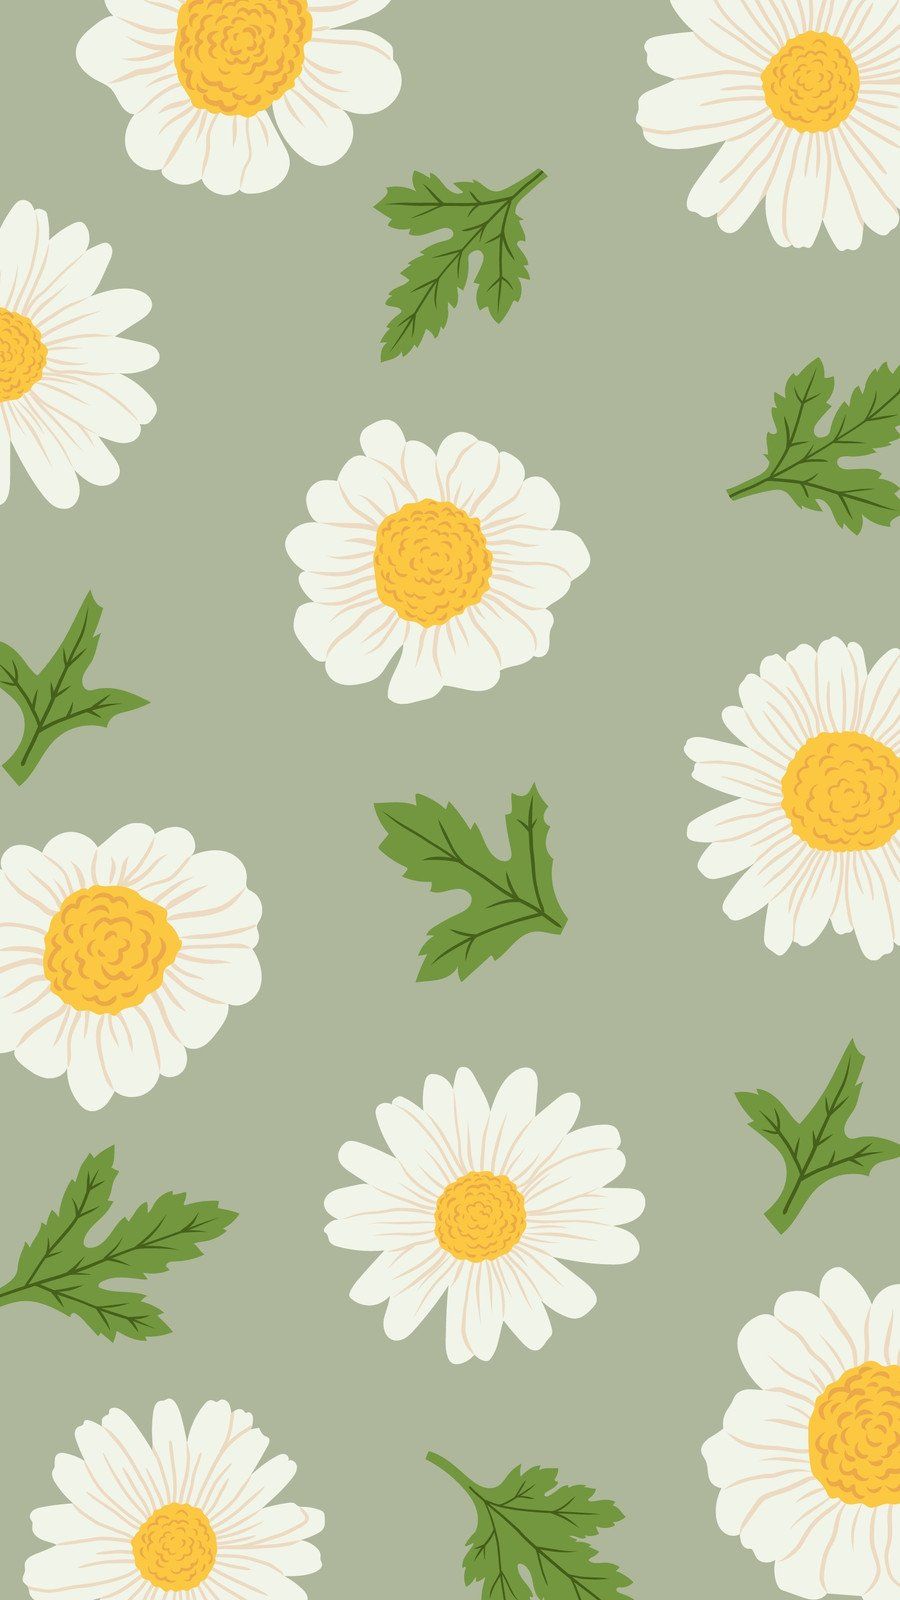 A cute wallpaper of daisies on a green background - Pastel green